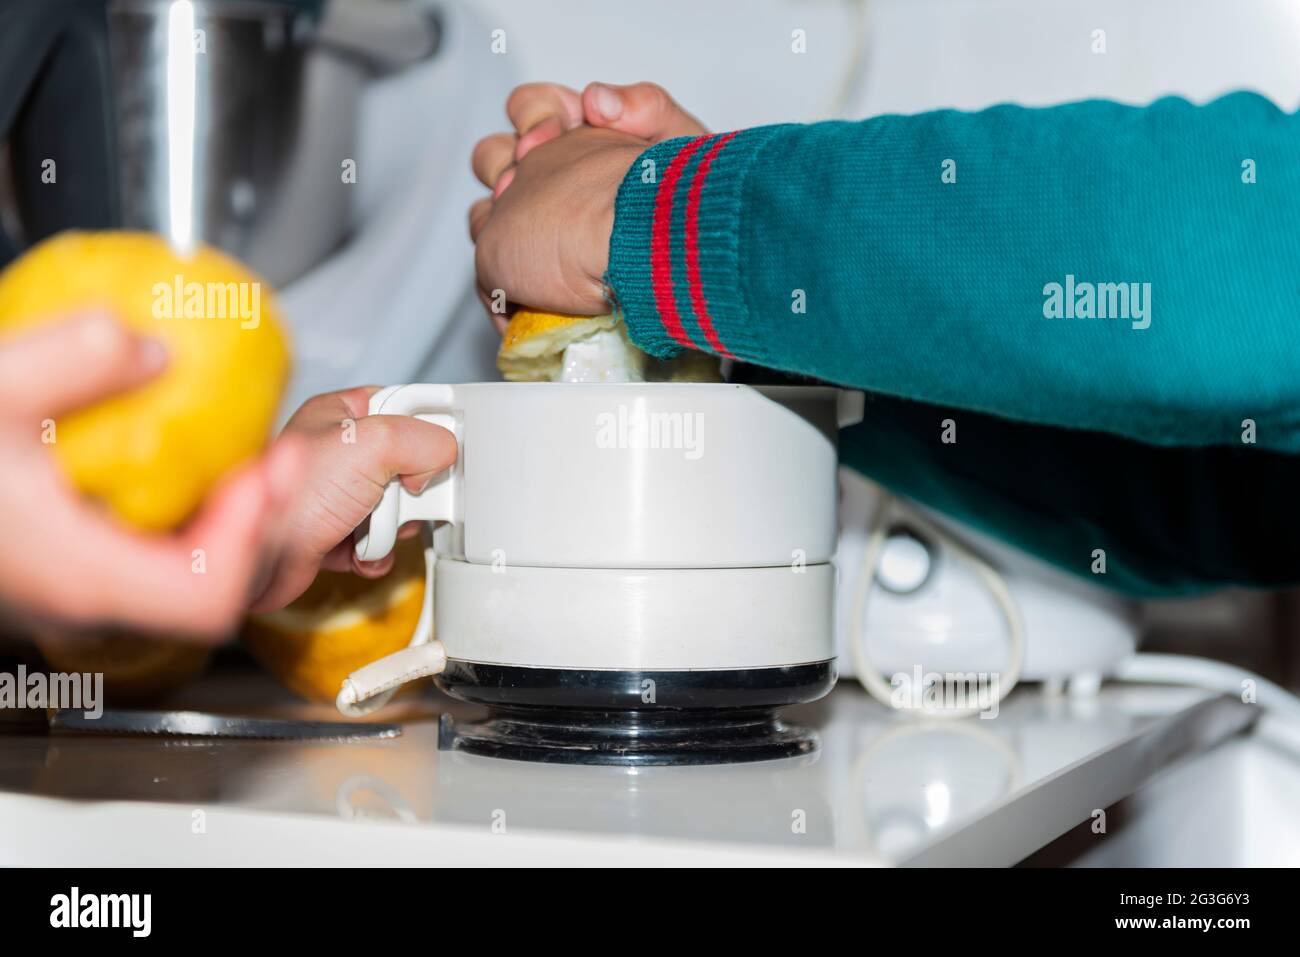 kids working together indoor kitchen enjoy juice whith machine squeezed Stock Photo